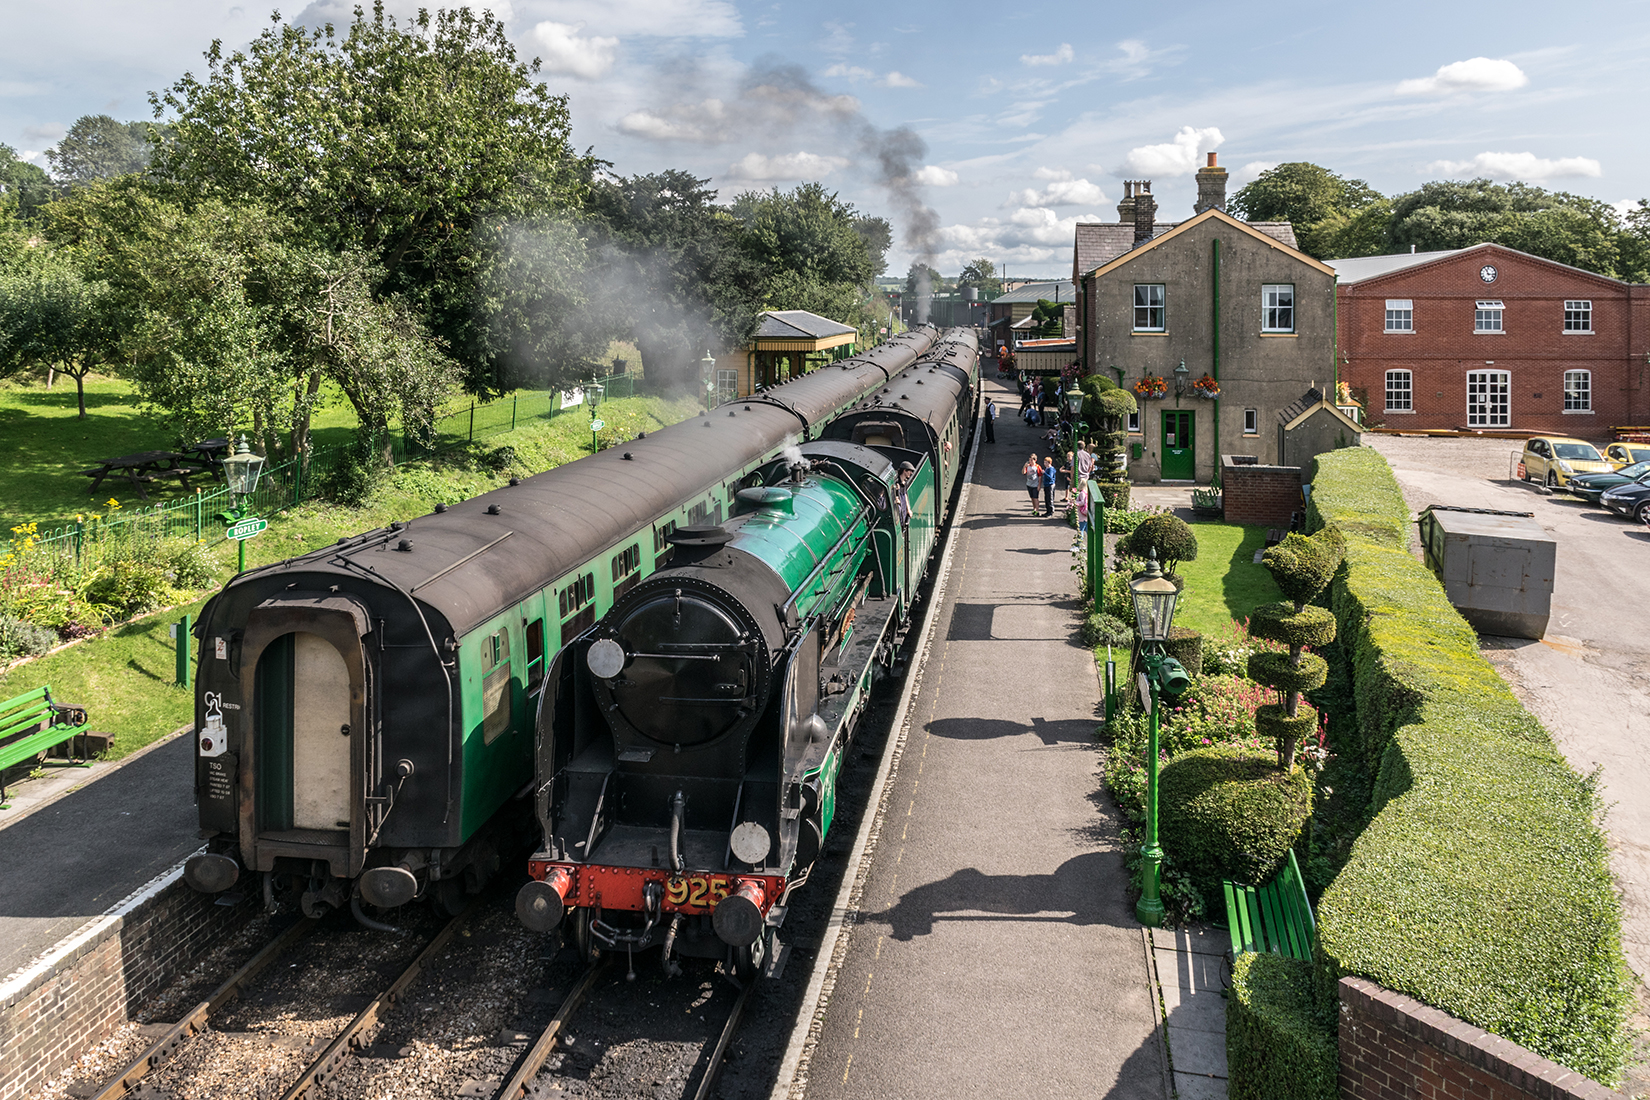 Schools' class 4-4-0, 925 'Cheltenham', pulls into Ropley station with an Alresford bound service from Alton